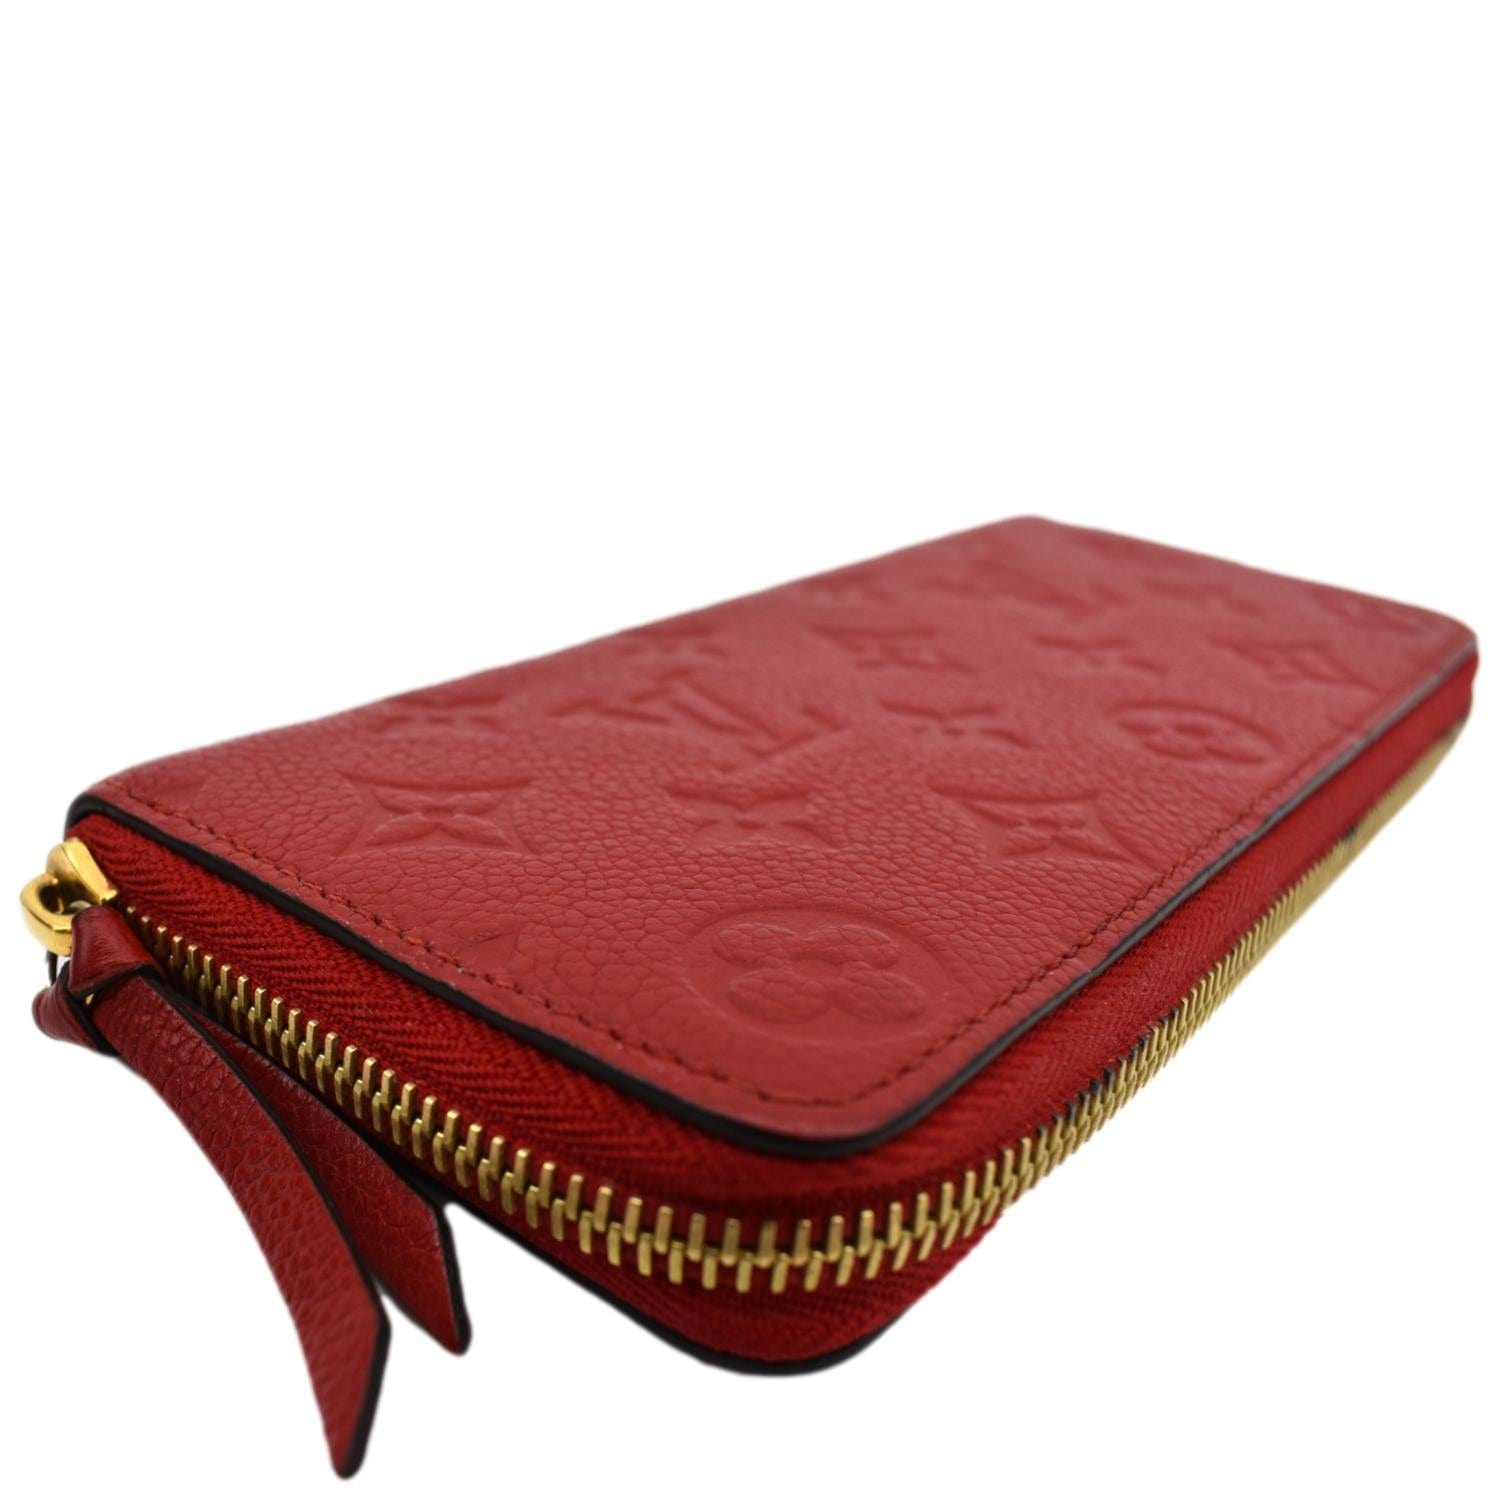 Clemence leather wallet